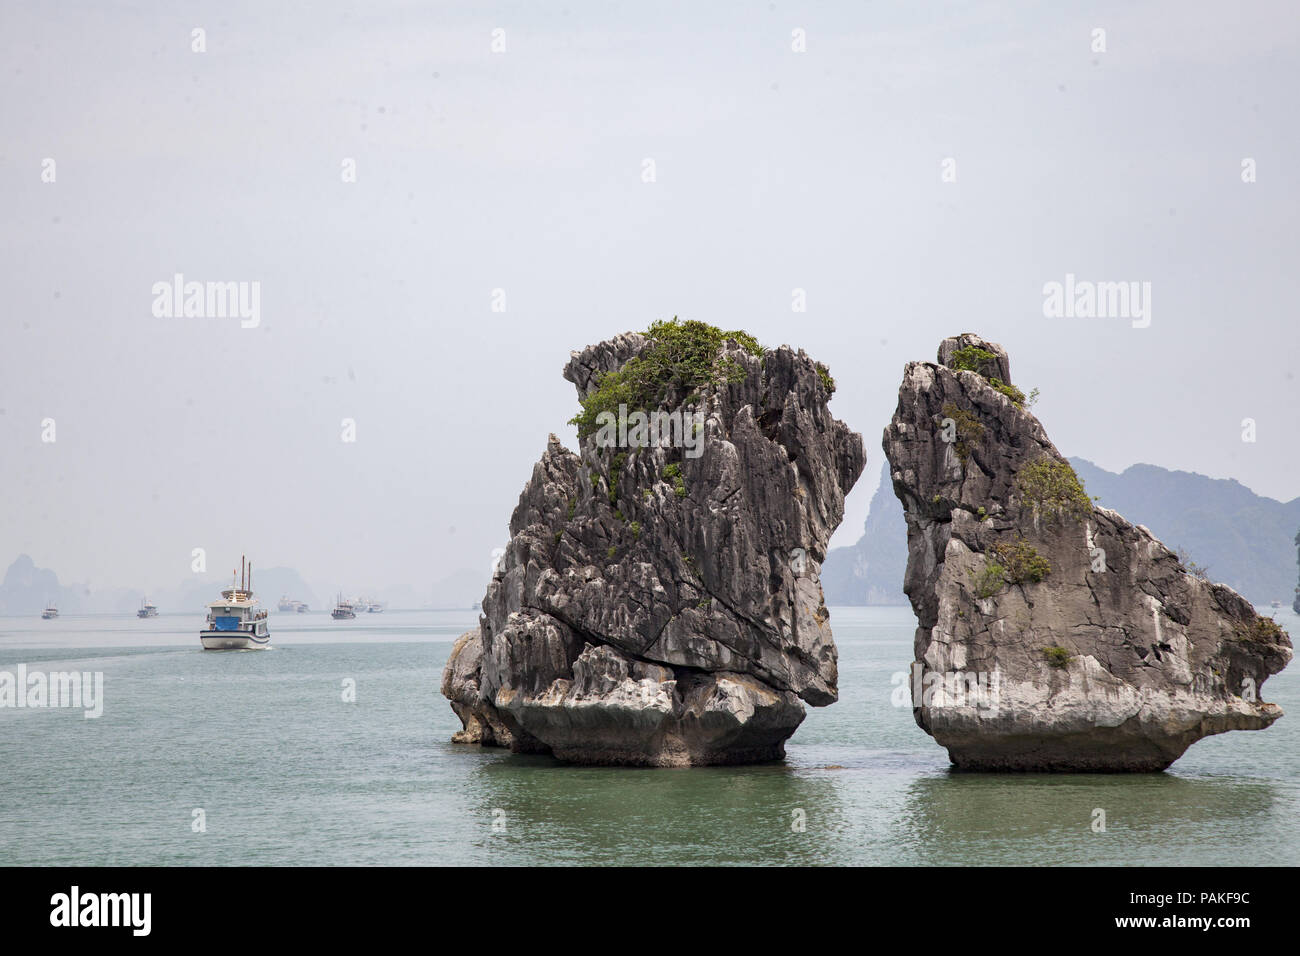 Ha Long, Ha Long, China. 24th July, 2018. Vietnam-Ha Long Bay is a UNESCO World Heritage Site and popular travel destination in Quang Ninh Province, Vietnam. The bay features thousands of limestone karsts and isles in various shapes and sizes. Ha Long Bay is a center of a larger zone which includes Bai Tu Long Bay to the northeast, and Cat Ba Island to the southwest. These larger zones share a similar geological, geographical, geomorphological, climate, and cultural characters. Credit: SIPA Asia/ZUMA Wire/Alamy Live News Stock Photo